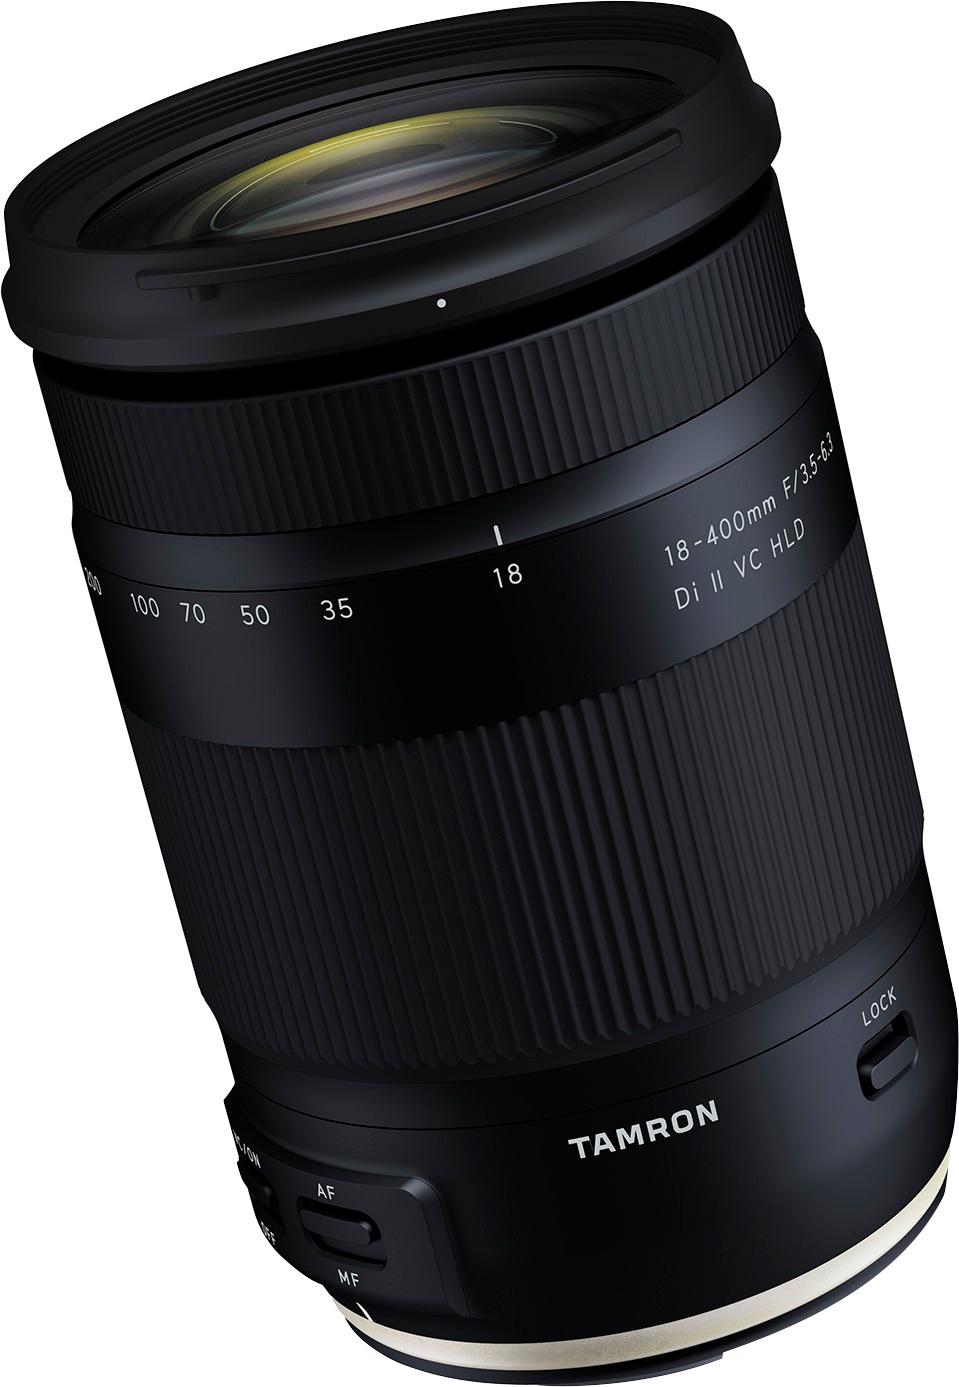 Angle View: Tamron - 18-400mm F/3.5-6.3 Di II VC HLD All-In-One Telephoto Lens for Canon APS-C DSLR Cameras - Black